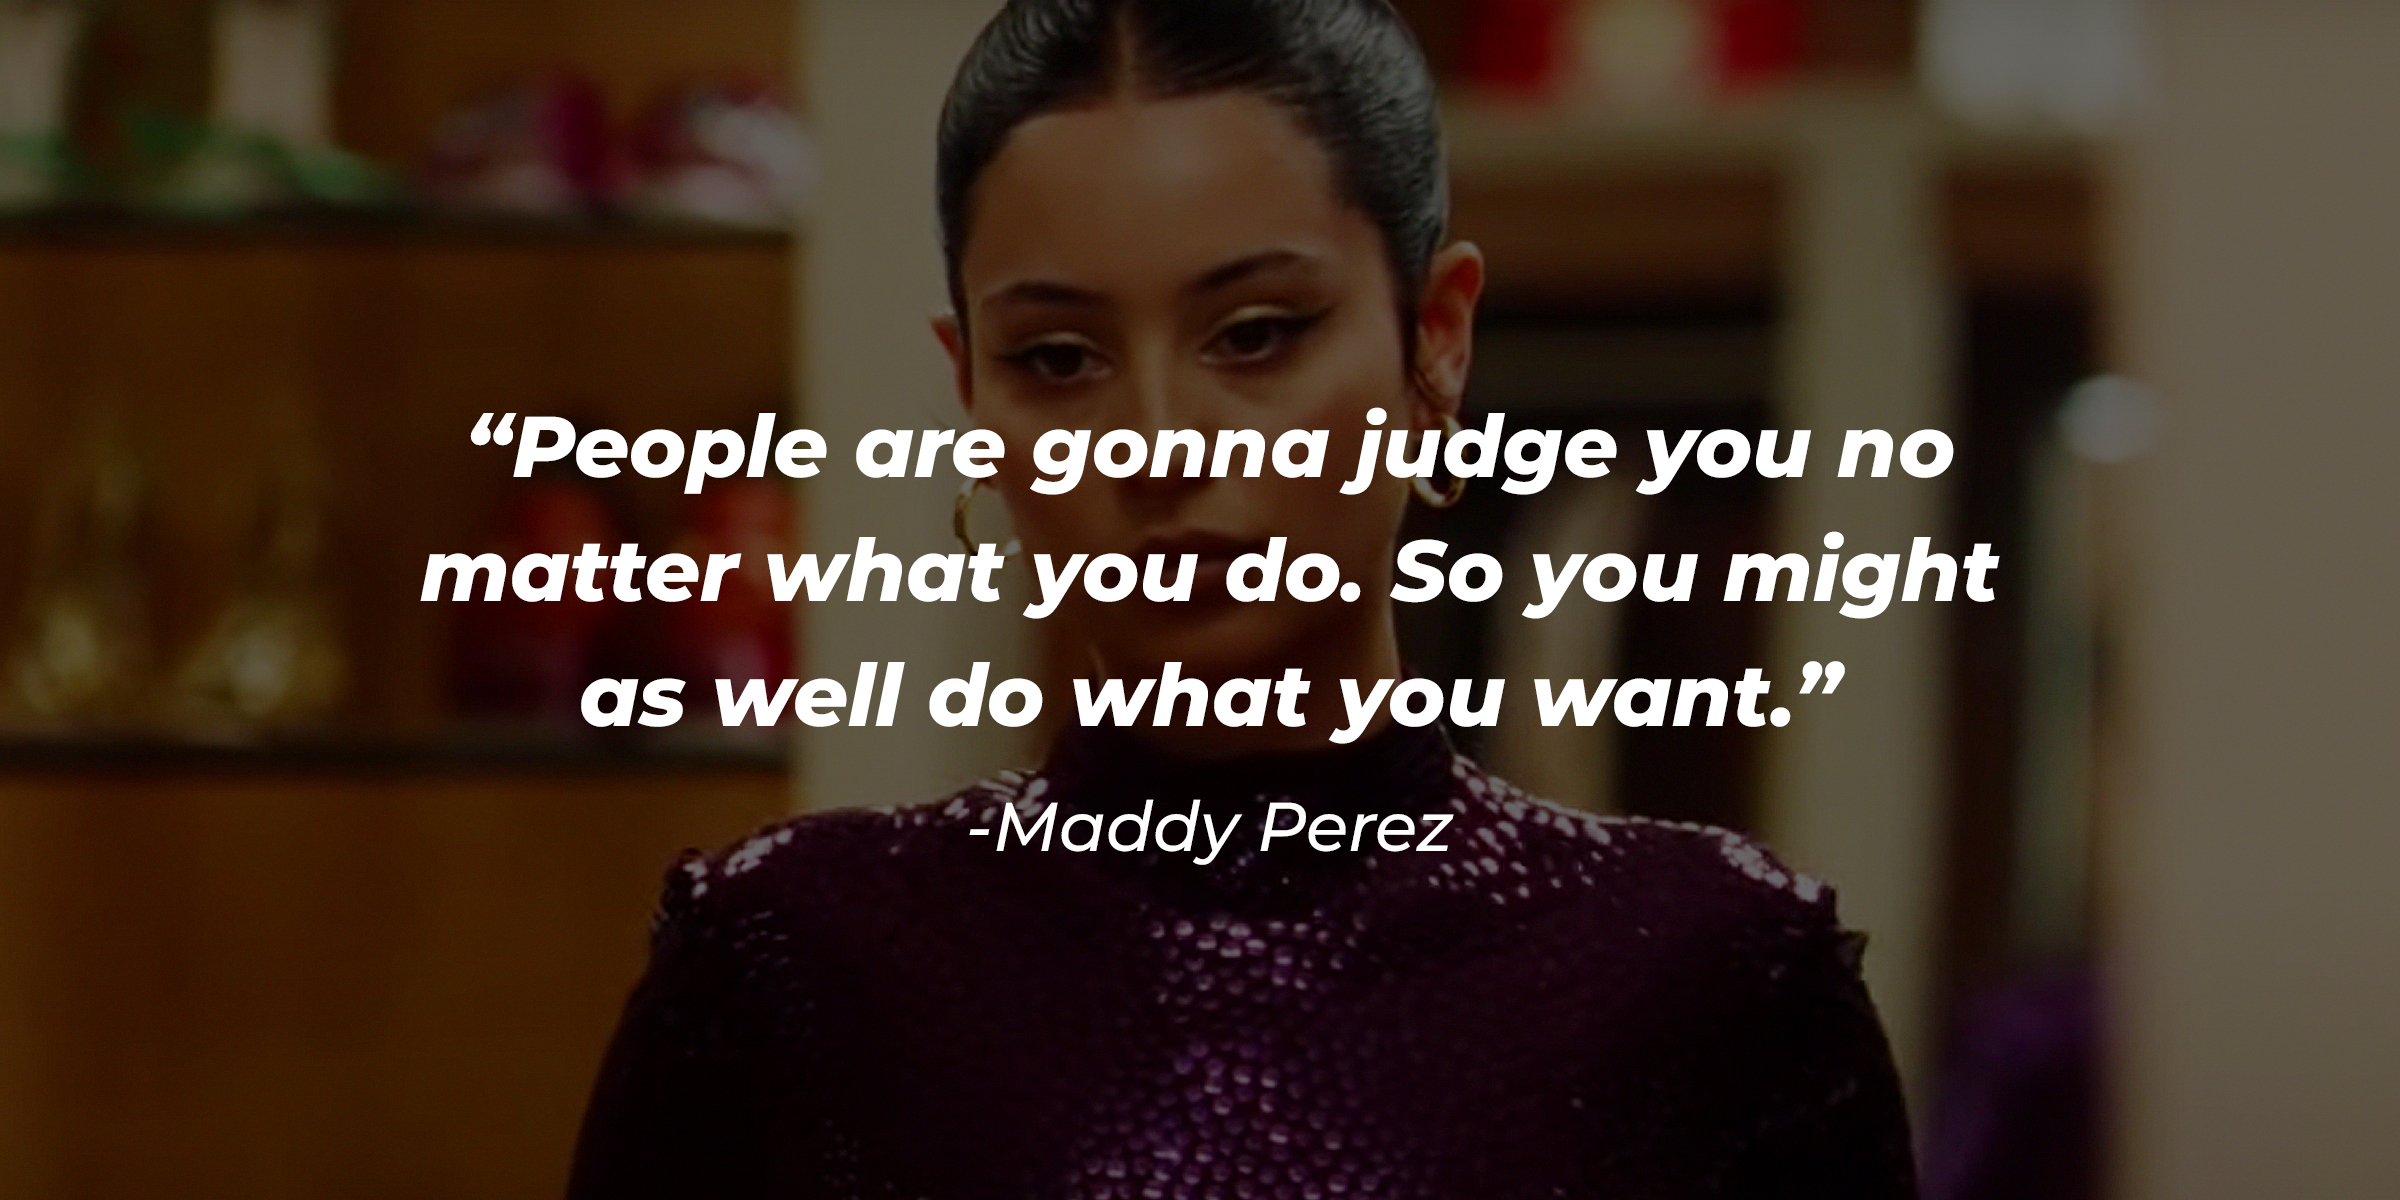 An image of Maddy Perez with her quote: “People are gonna judge you no matter what you do. So you might as well do what you want.” | Source: Youtube.com/EuphoriaHBO